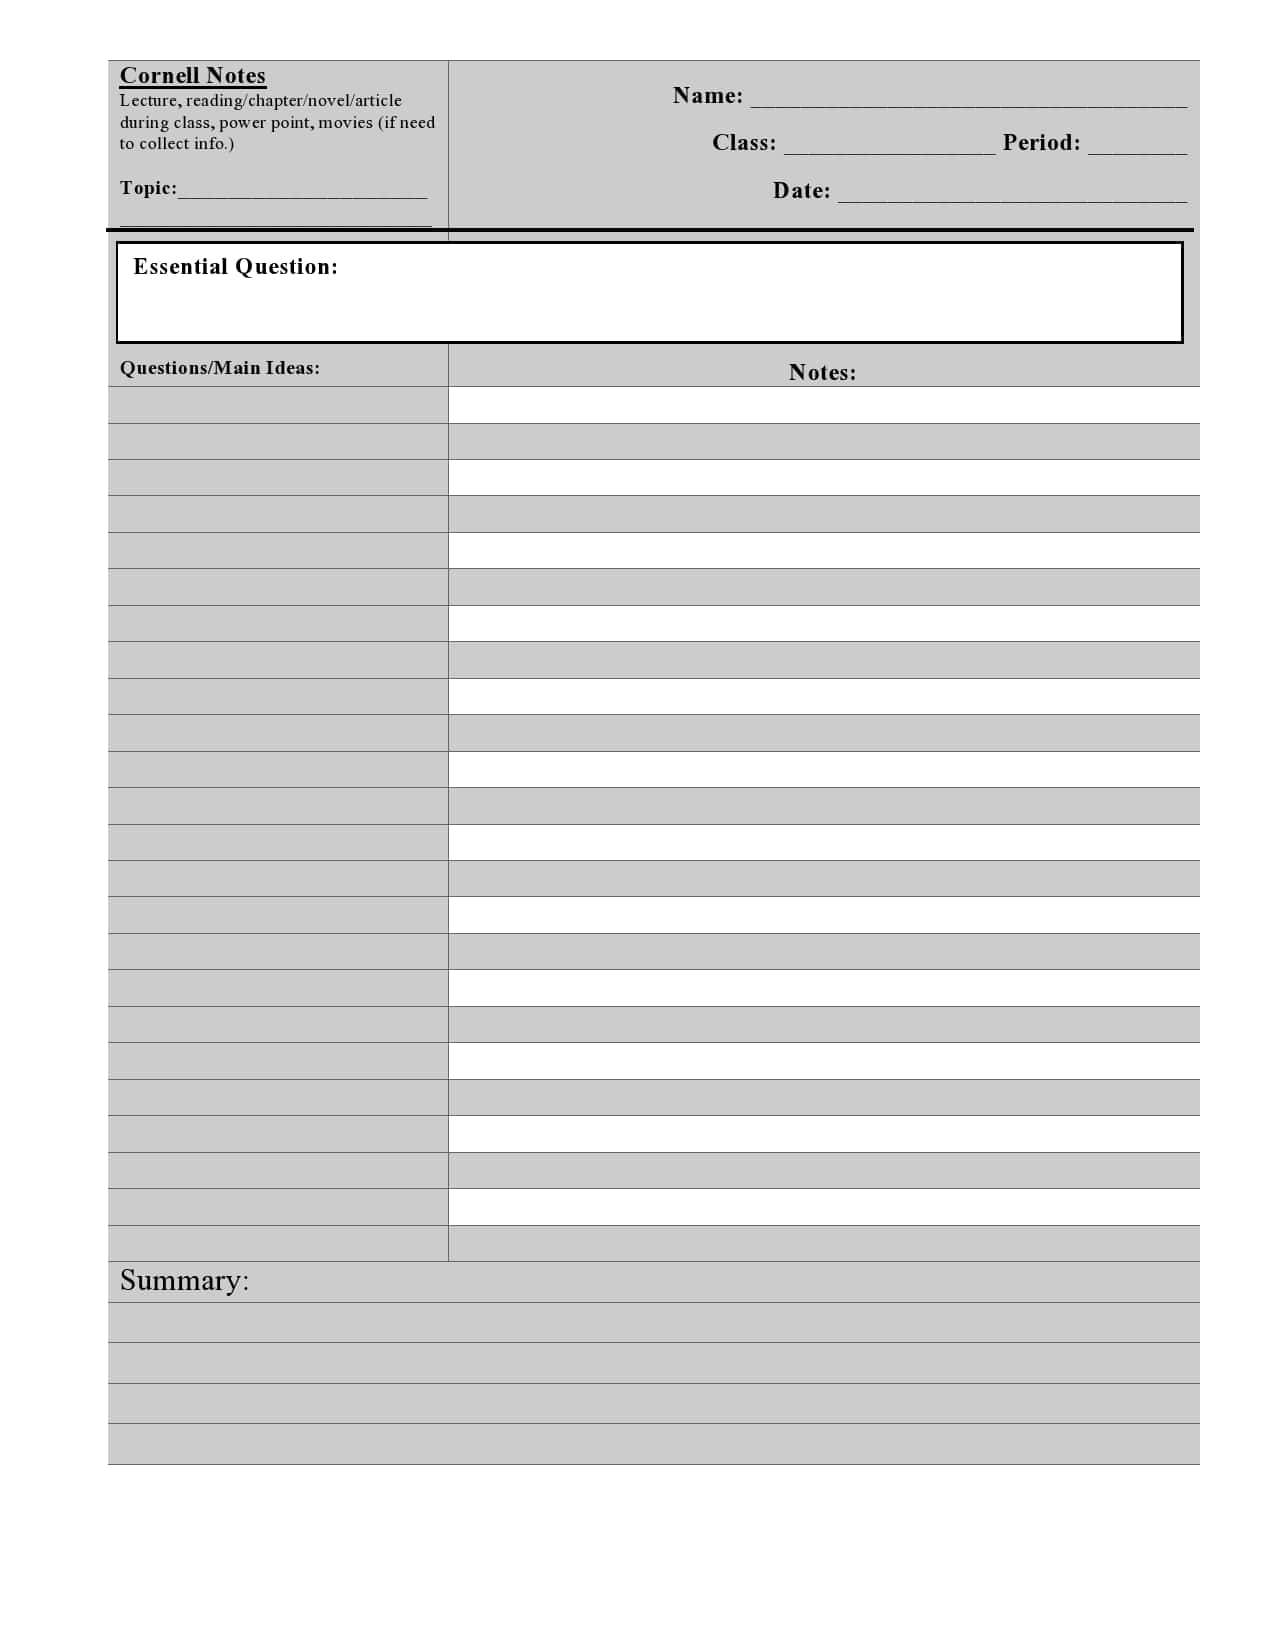 21 Printable Cornell Notes Templates [Free] - TemplateArchive Throughout Novel Notes Template